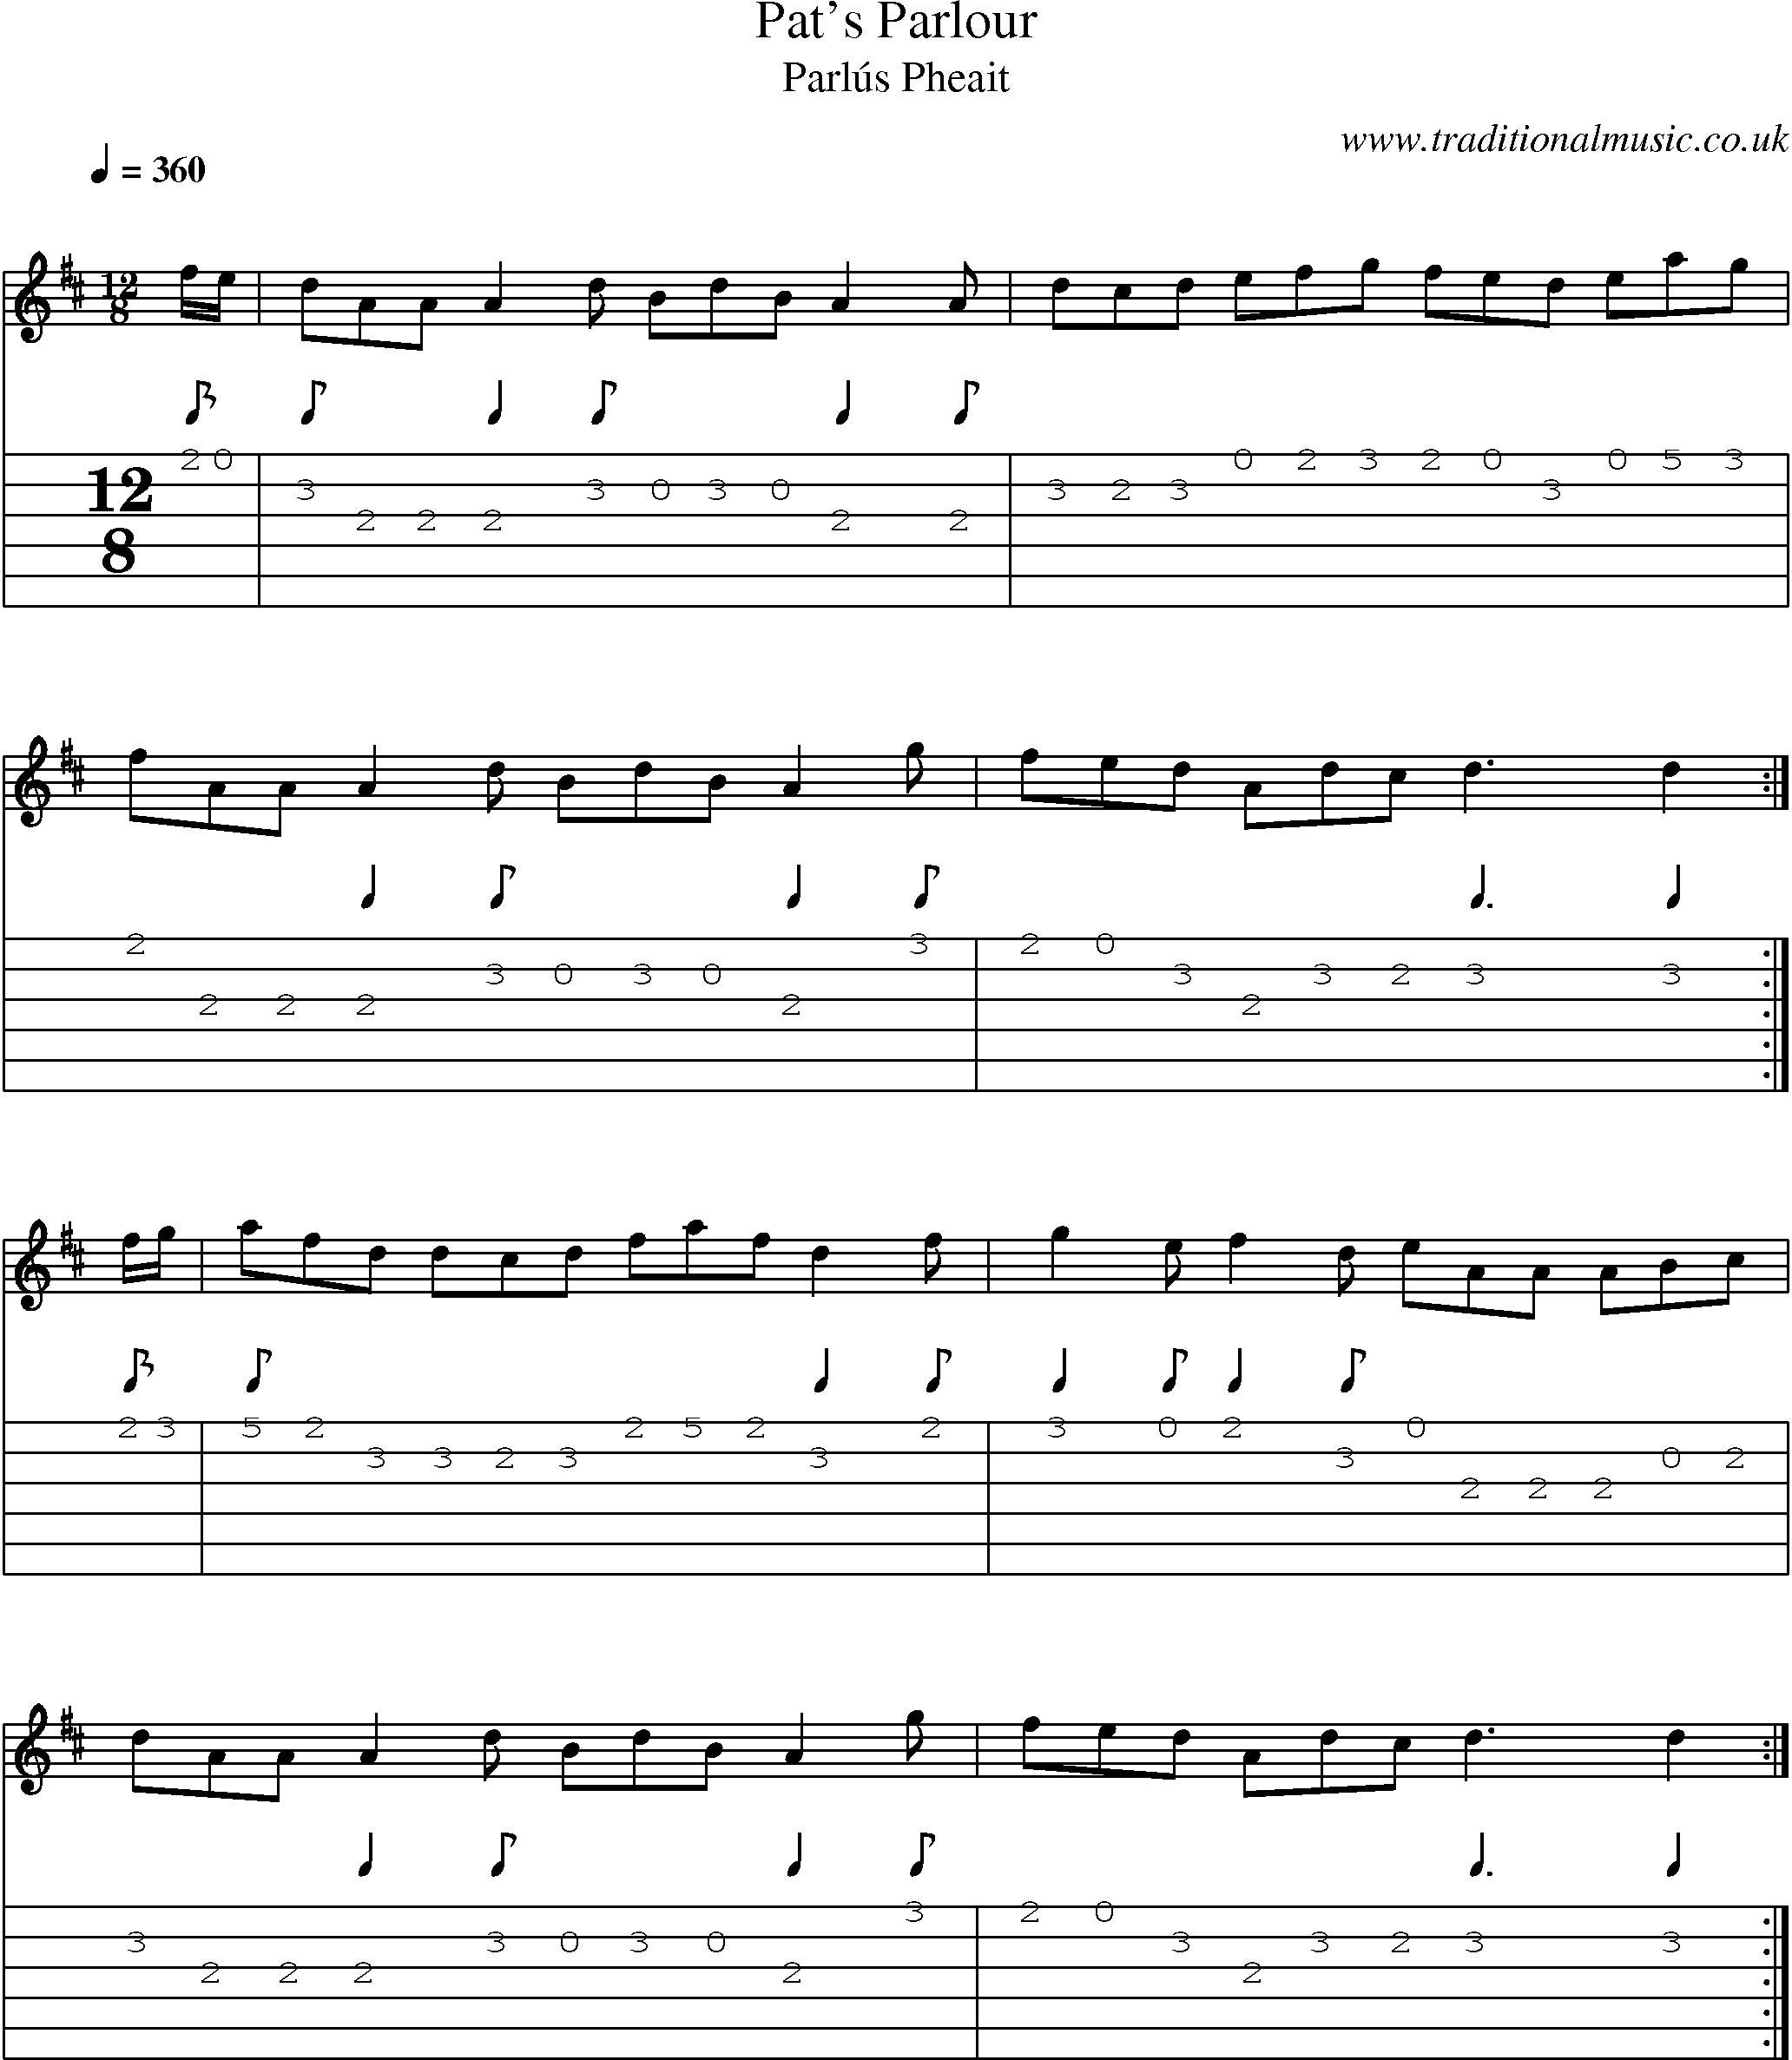 Music Score and Guitar Tabs for Pats Parlour